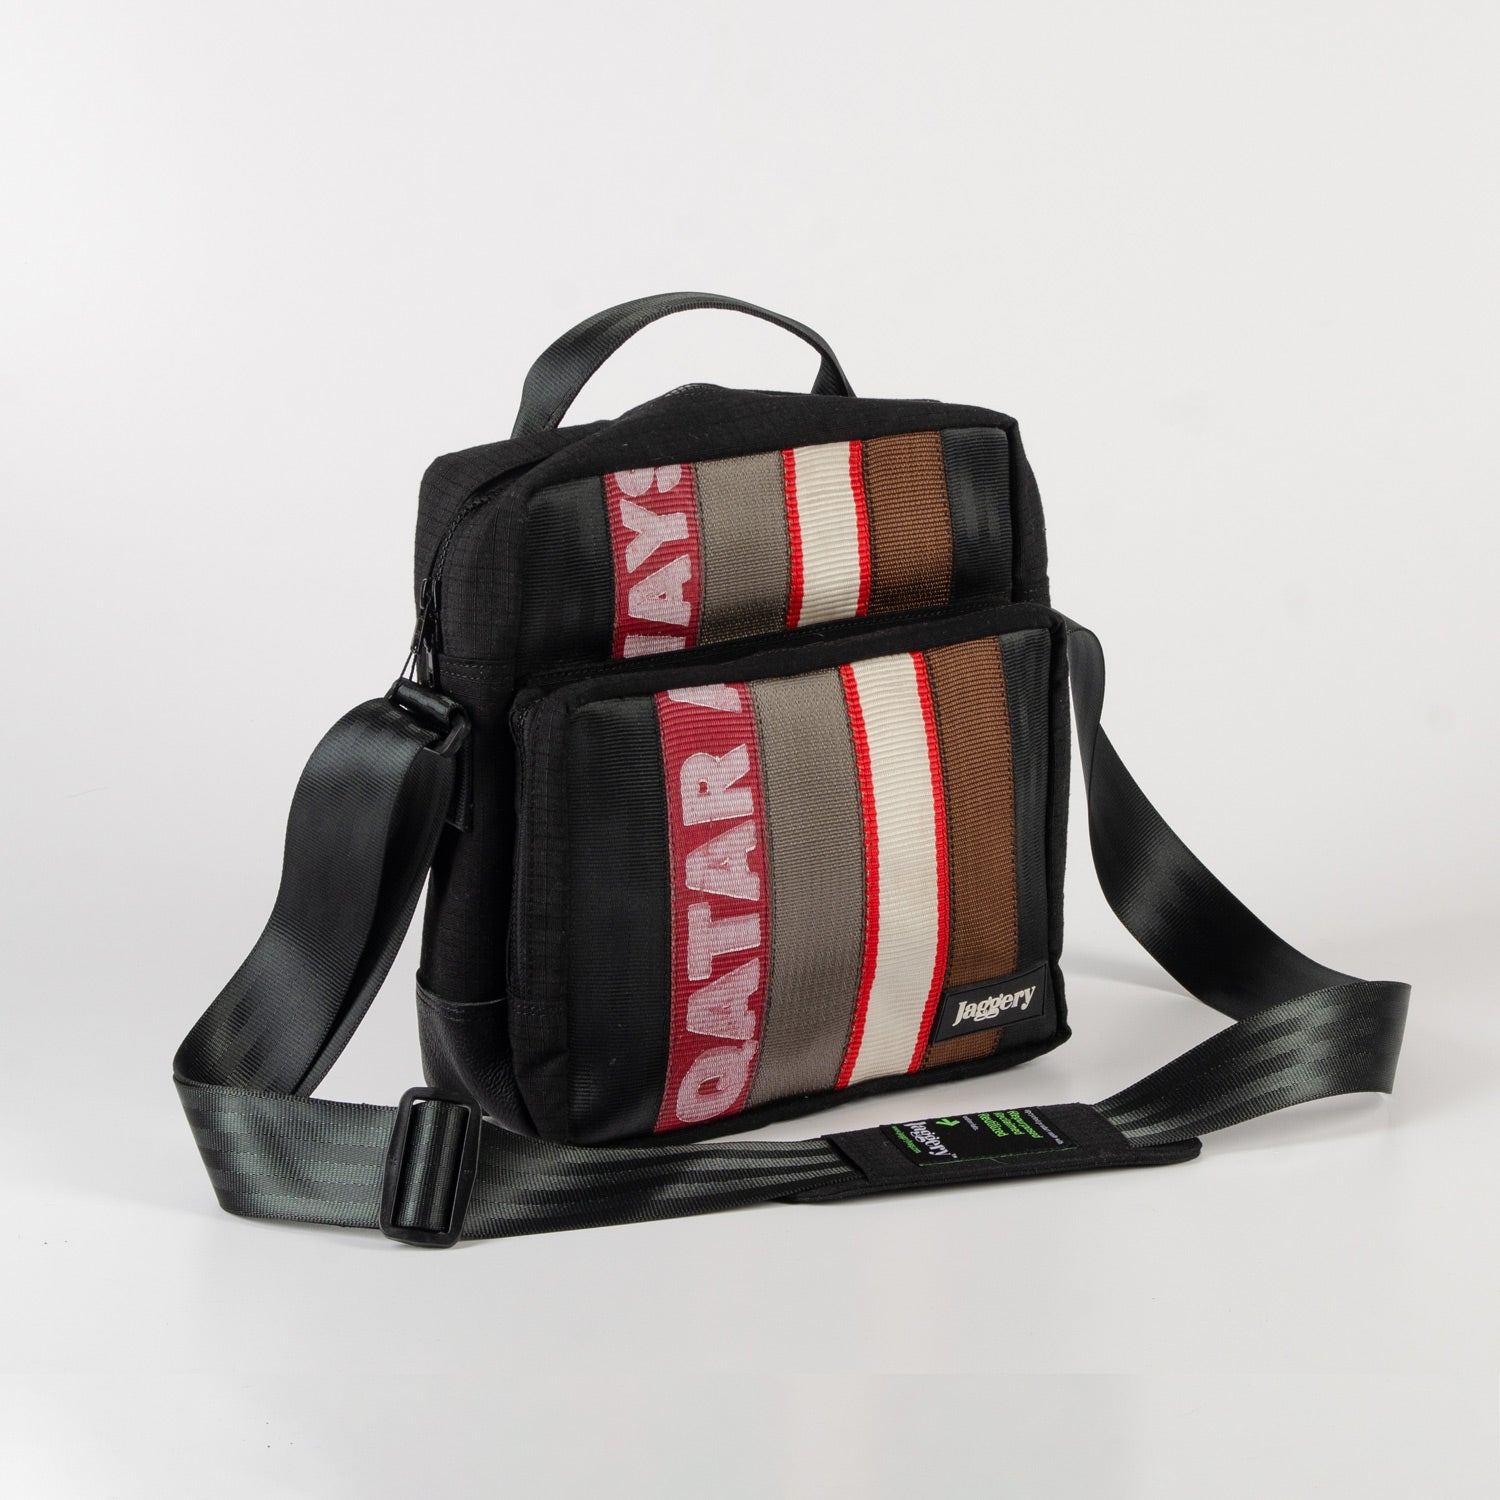 Museum of Fade Mini Co-founder's Satchel in Ex-Cargo Belts & Rescued Car Seat Belts [10" bag]